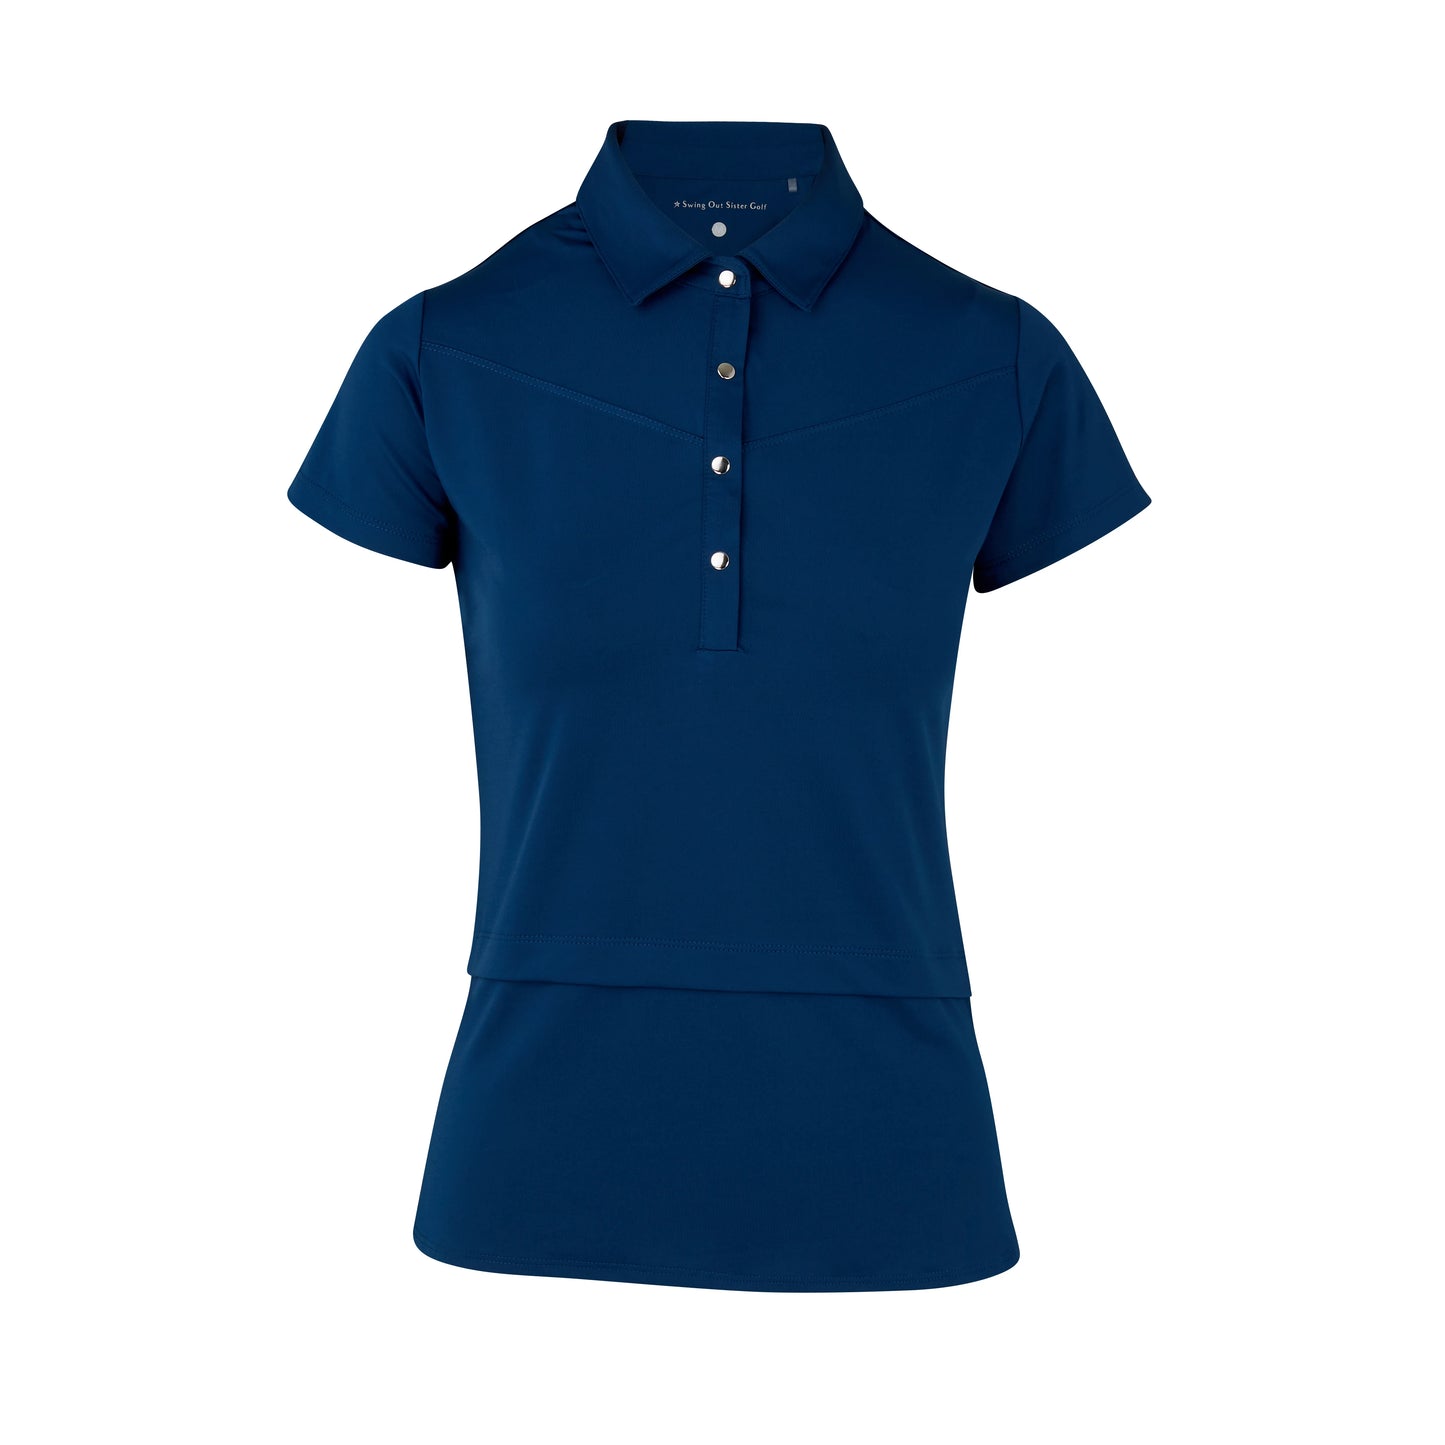 Swing Out Sister Amelie Cap Sleeve Polo - Atlantic Blue